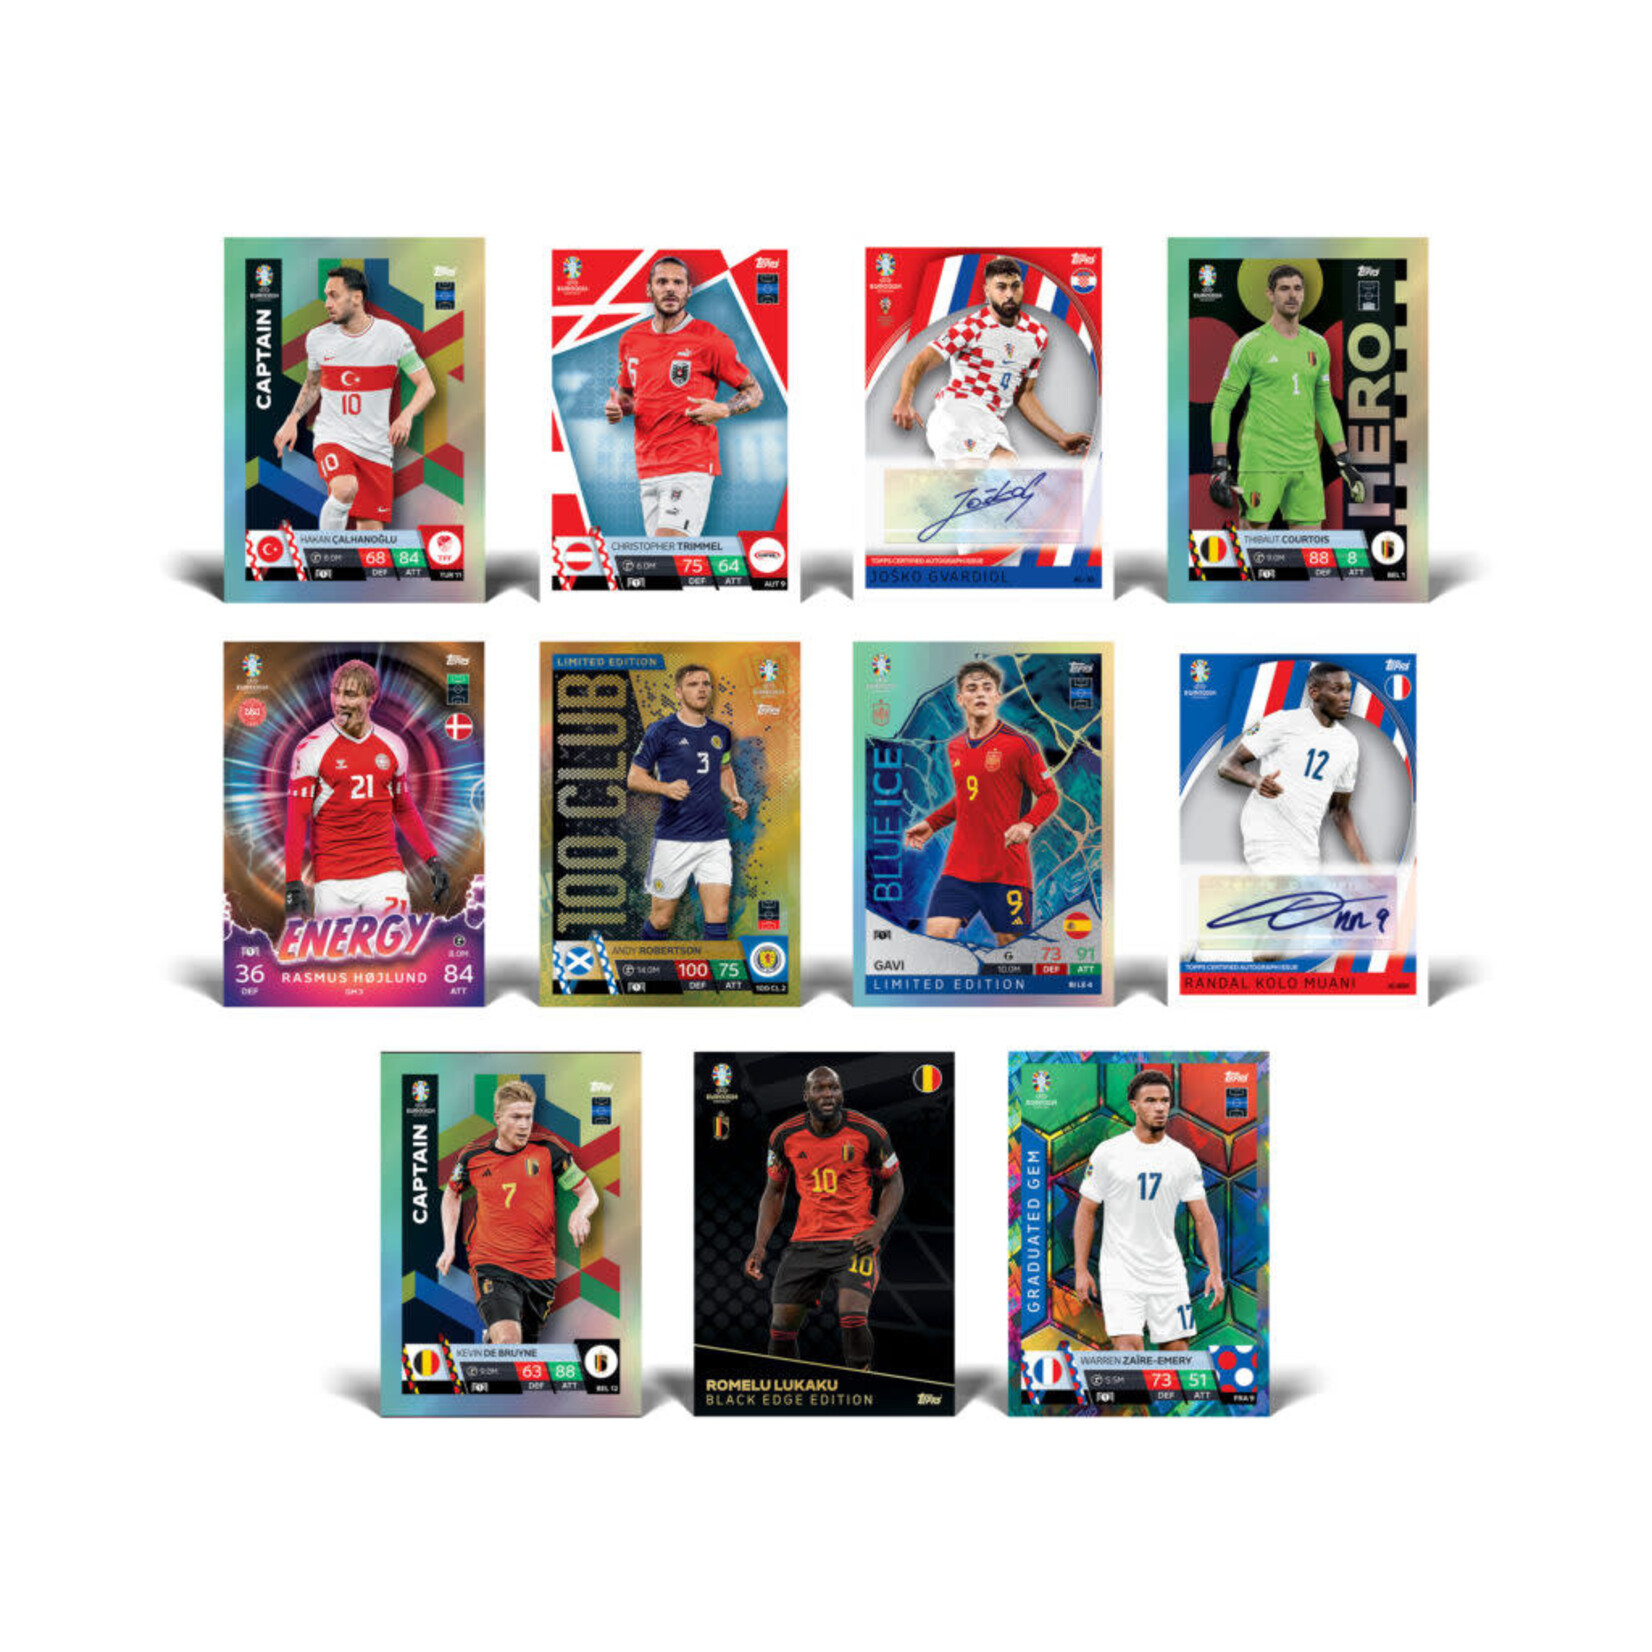 Topps 2024 TOPPS MATCH ATTAX UEFA EURO CARDS – 36-PACK BOX (288 CARDS)